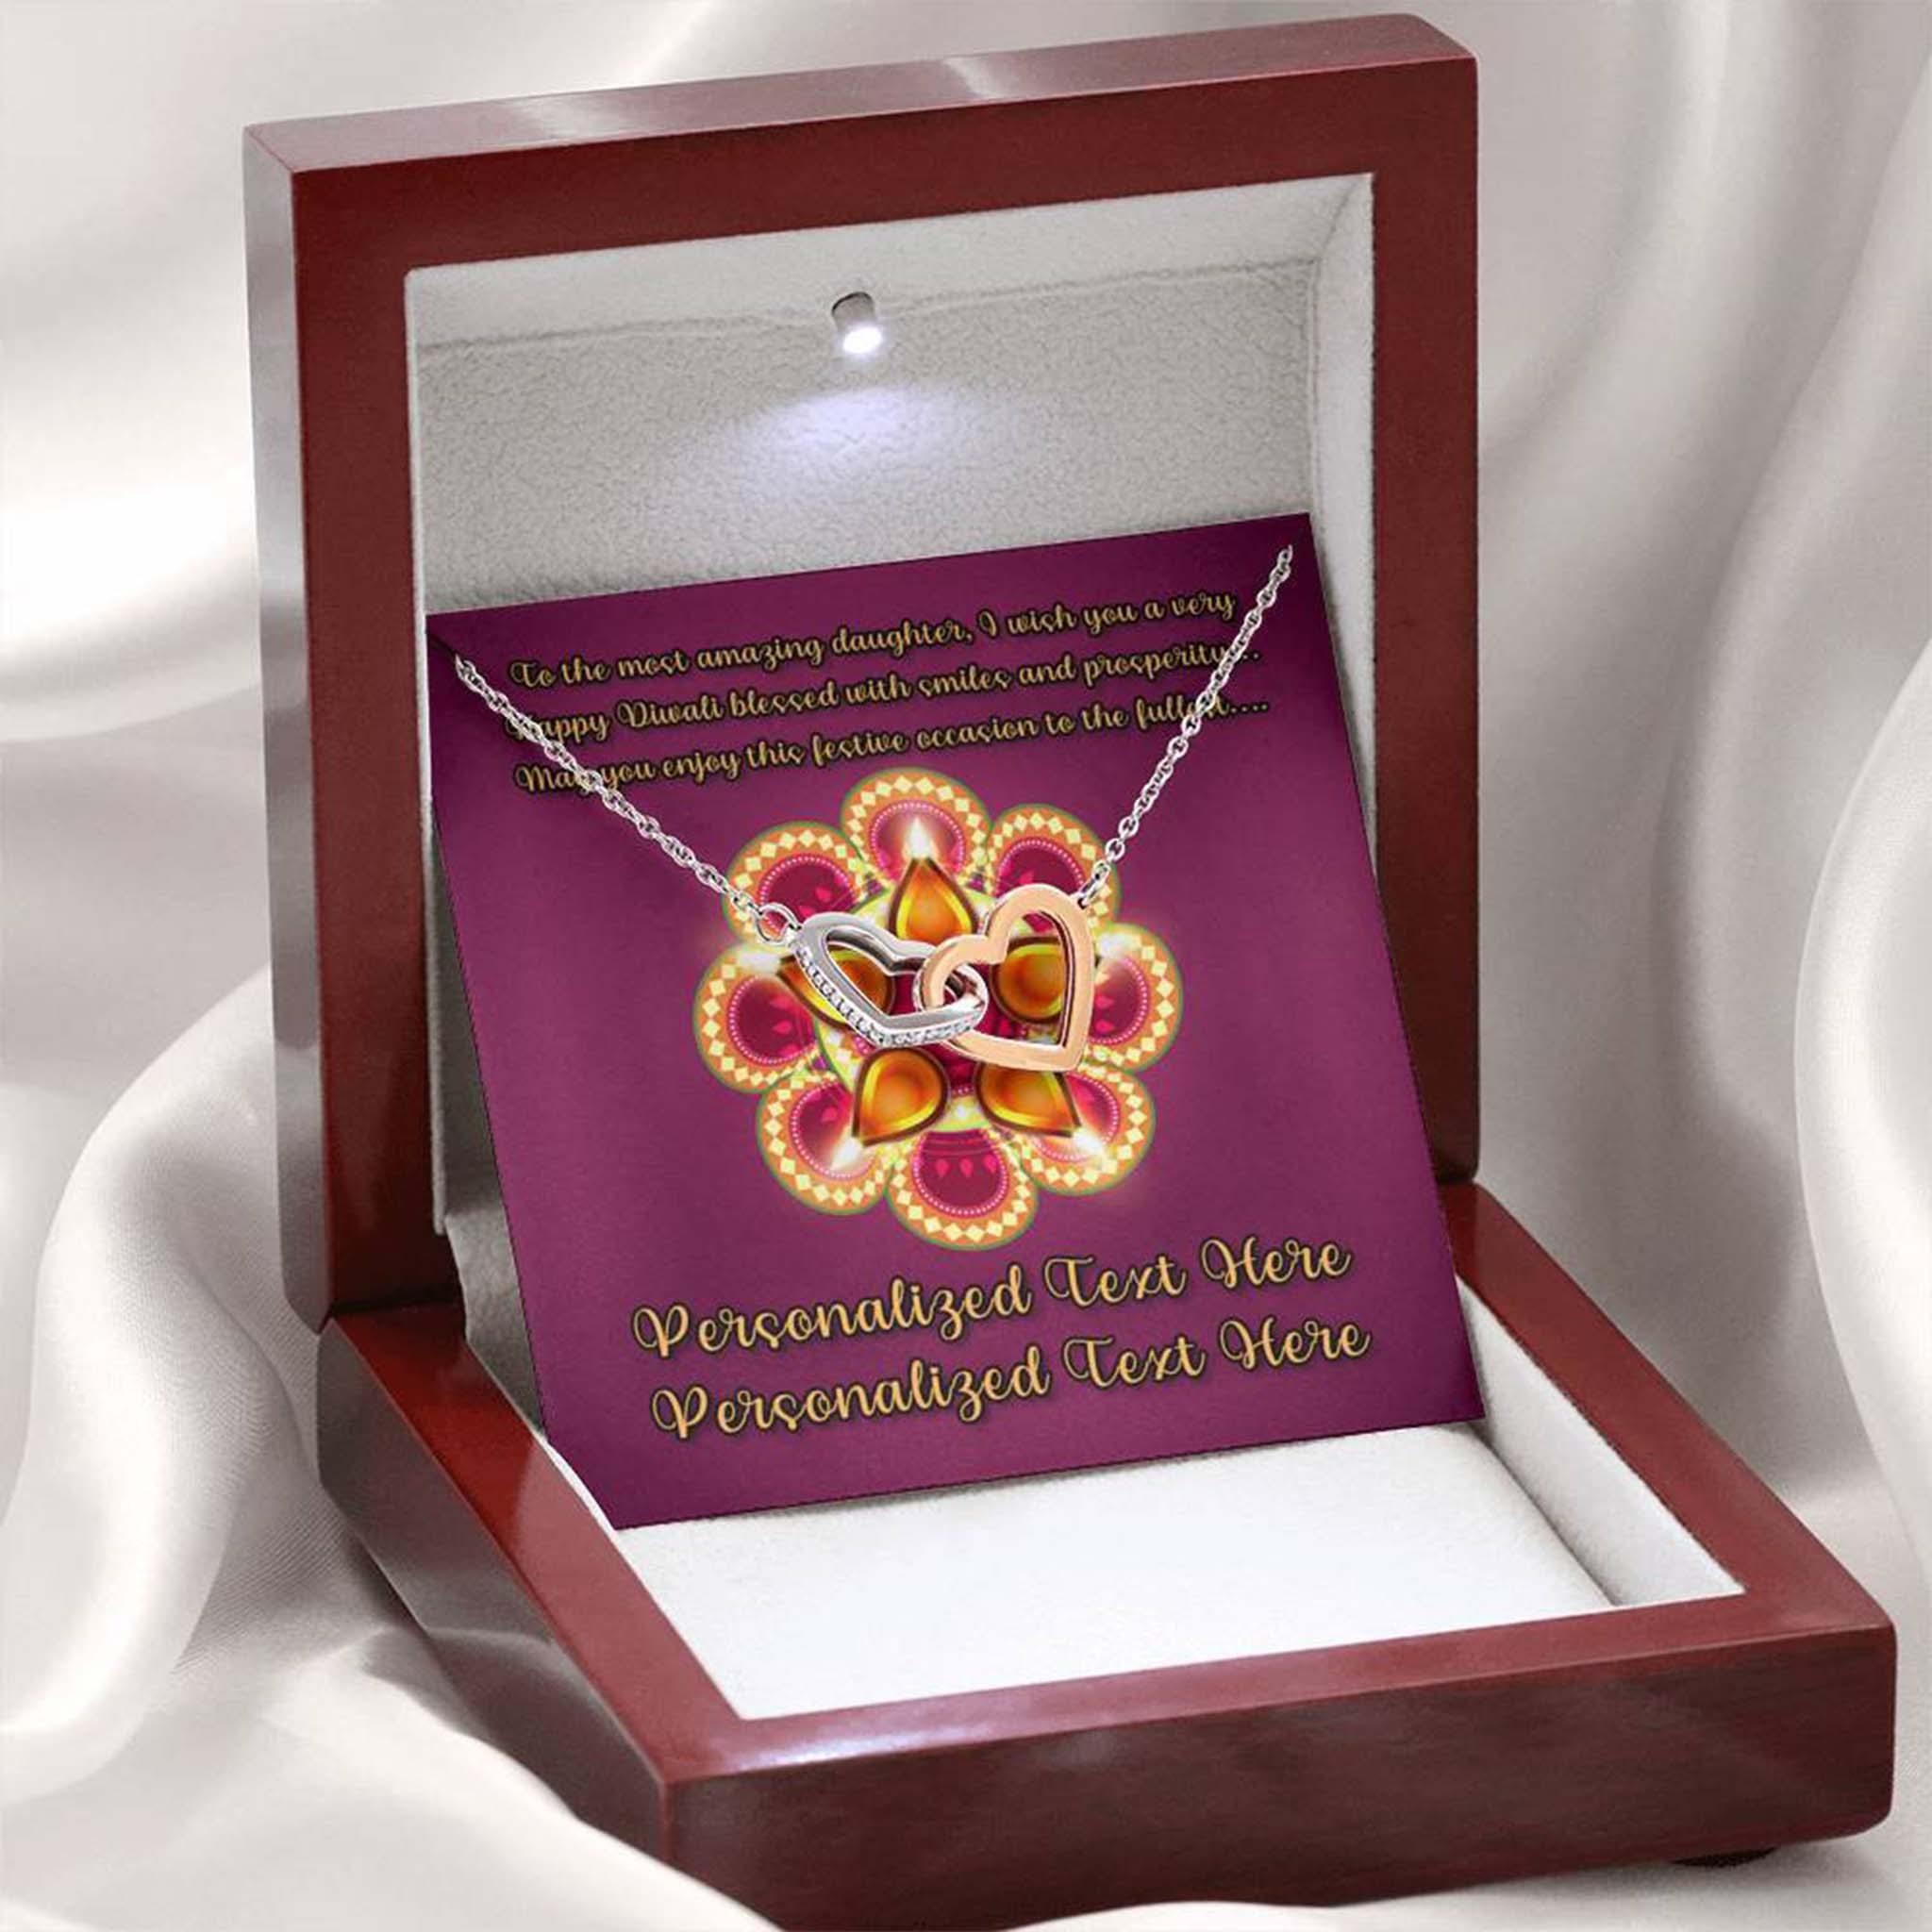 Interlocking Hearts Necklace Happy Diwali Daughter v2 Personalized Insert CardCustomly Gifts